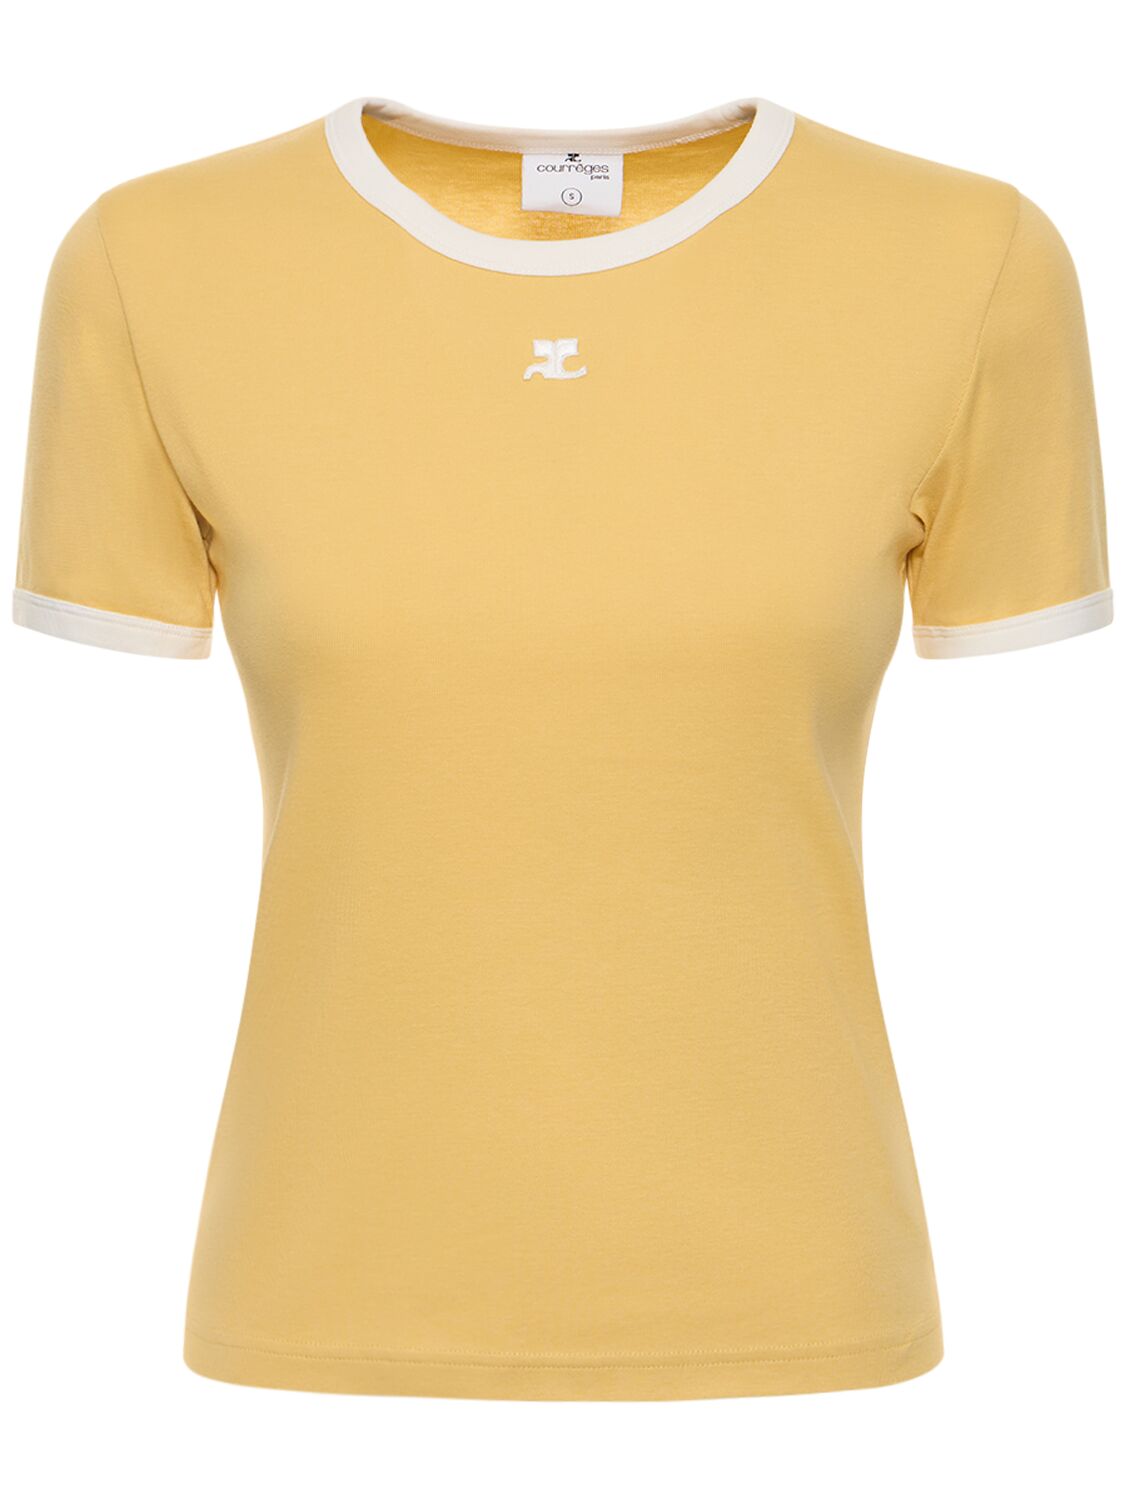 Courrèges Contrast Cotton Jersey T-shirt In Yellow